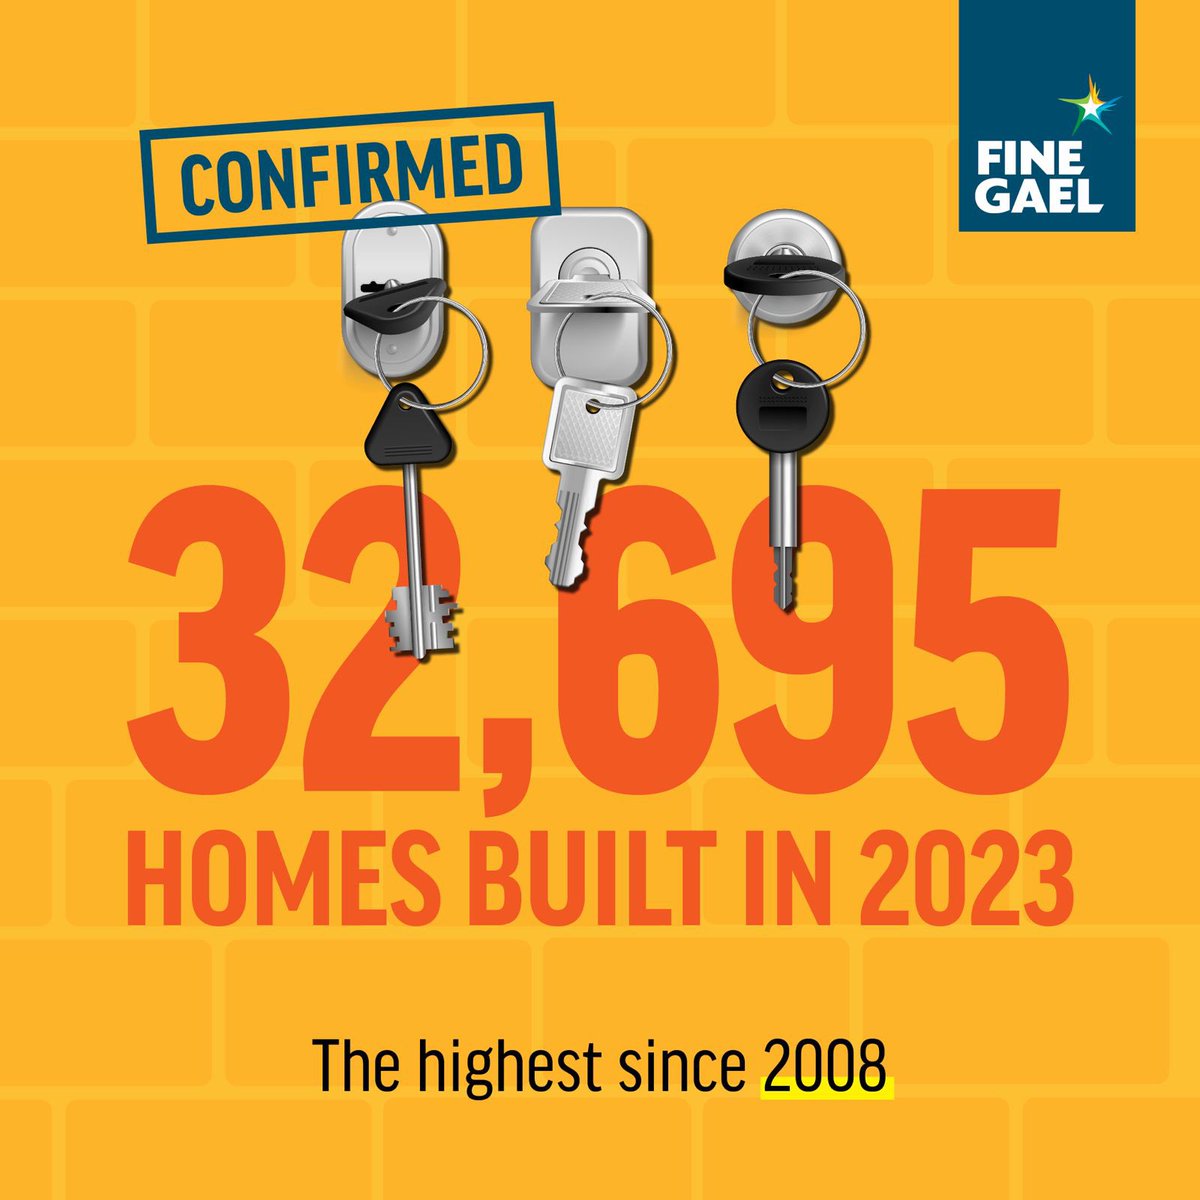 CONFIRMED: 32,695 homes were built in Ireland in 2023 — that’s the highest since 2008. Fine Gael is working to make sure young people can own their own home.